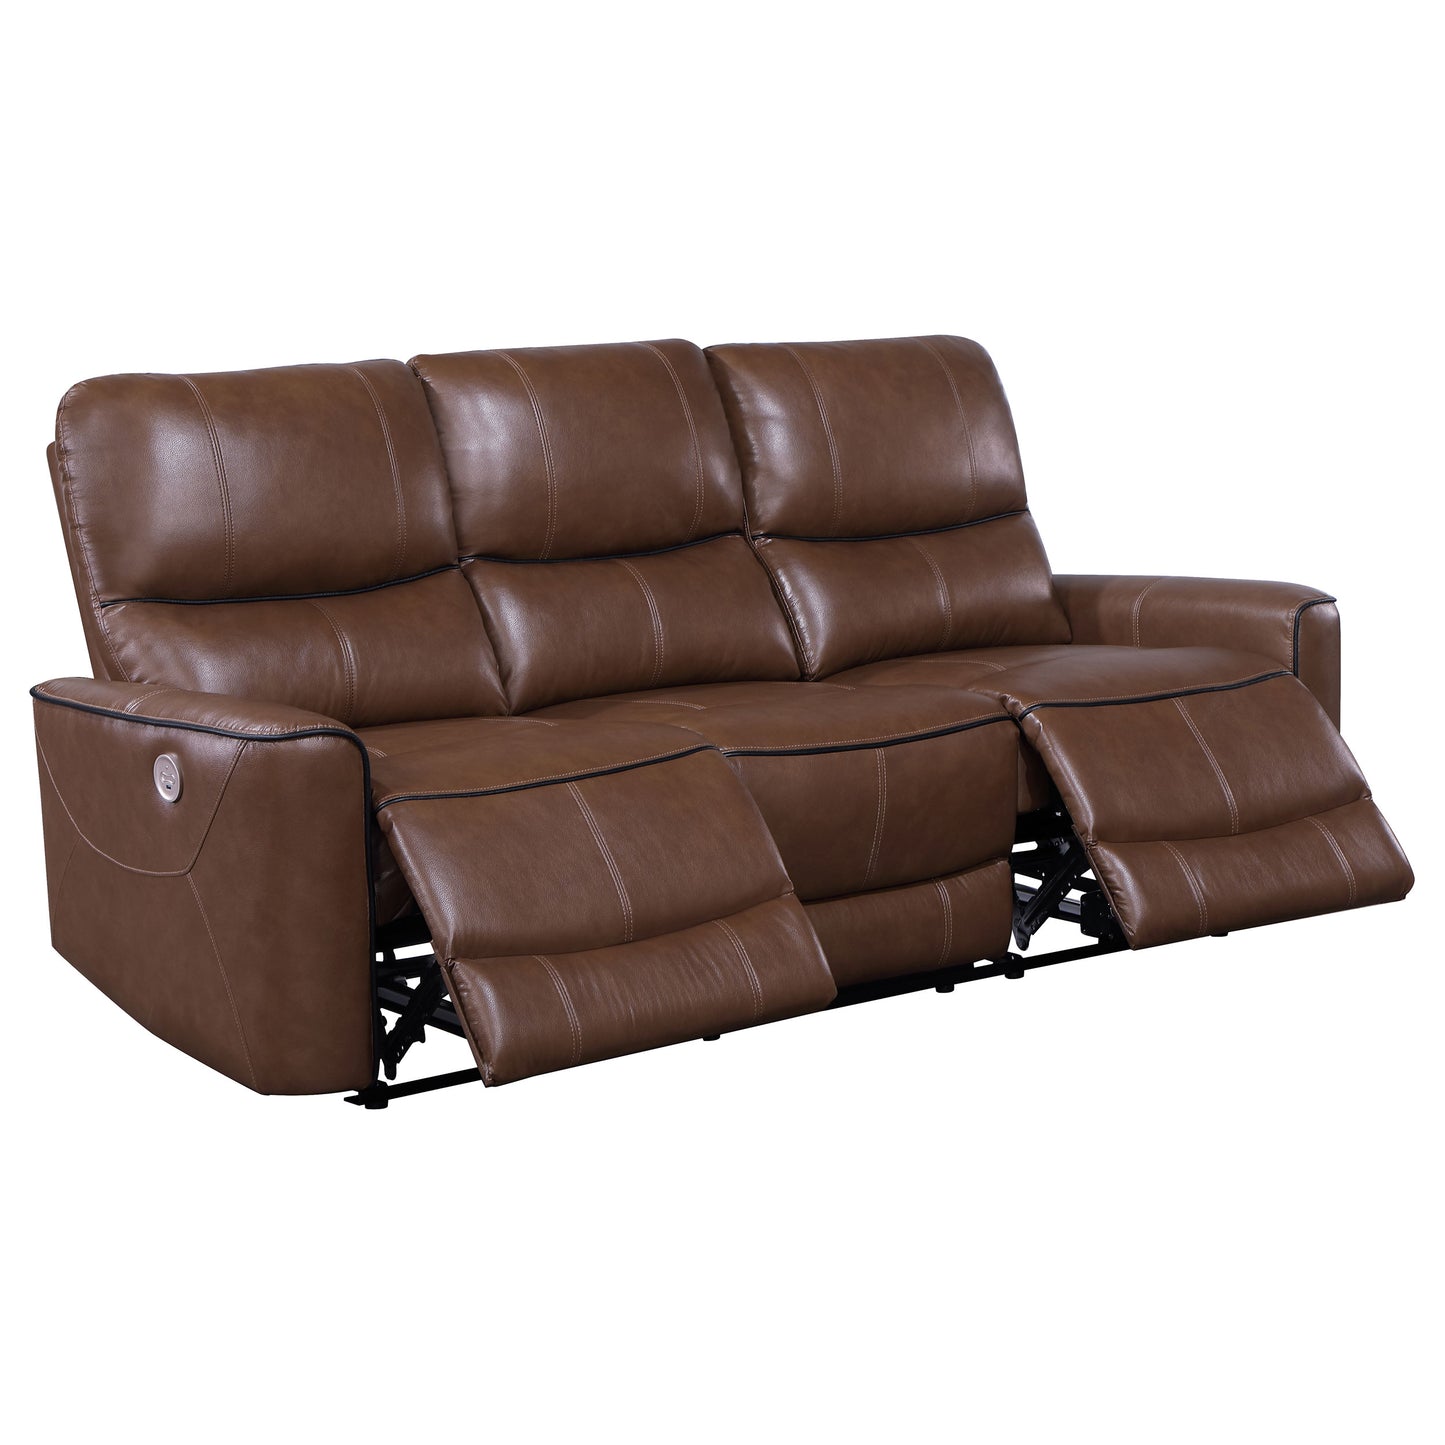 Greenfield 2-piece Upholstered Power Reclining Sofa Set Saddle Brown